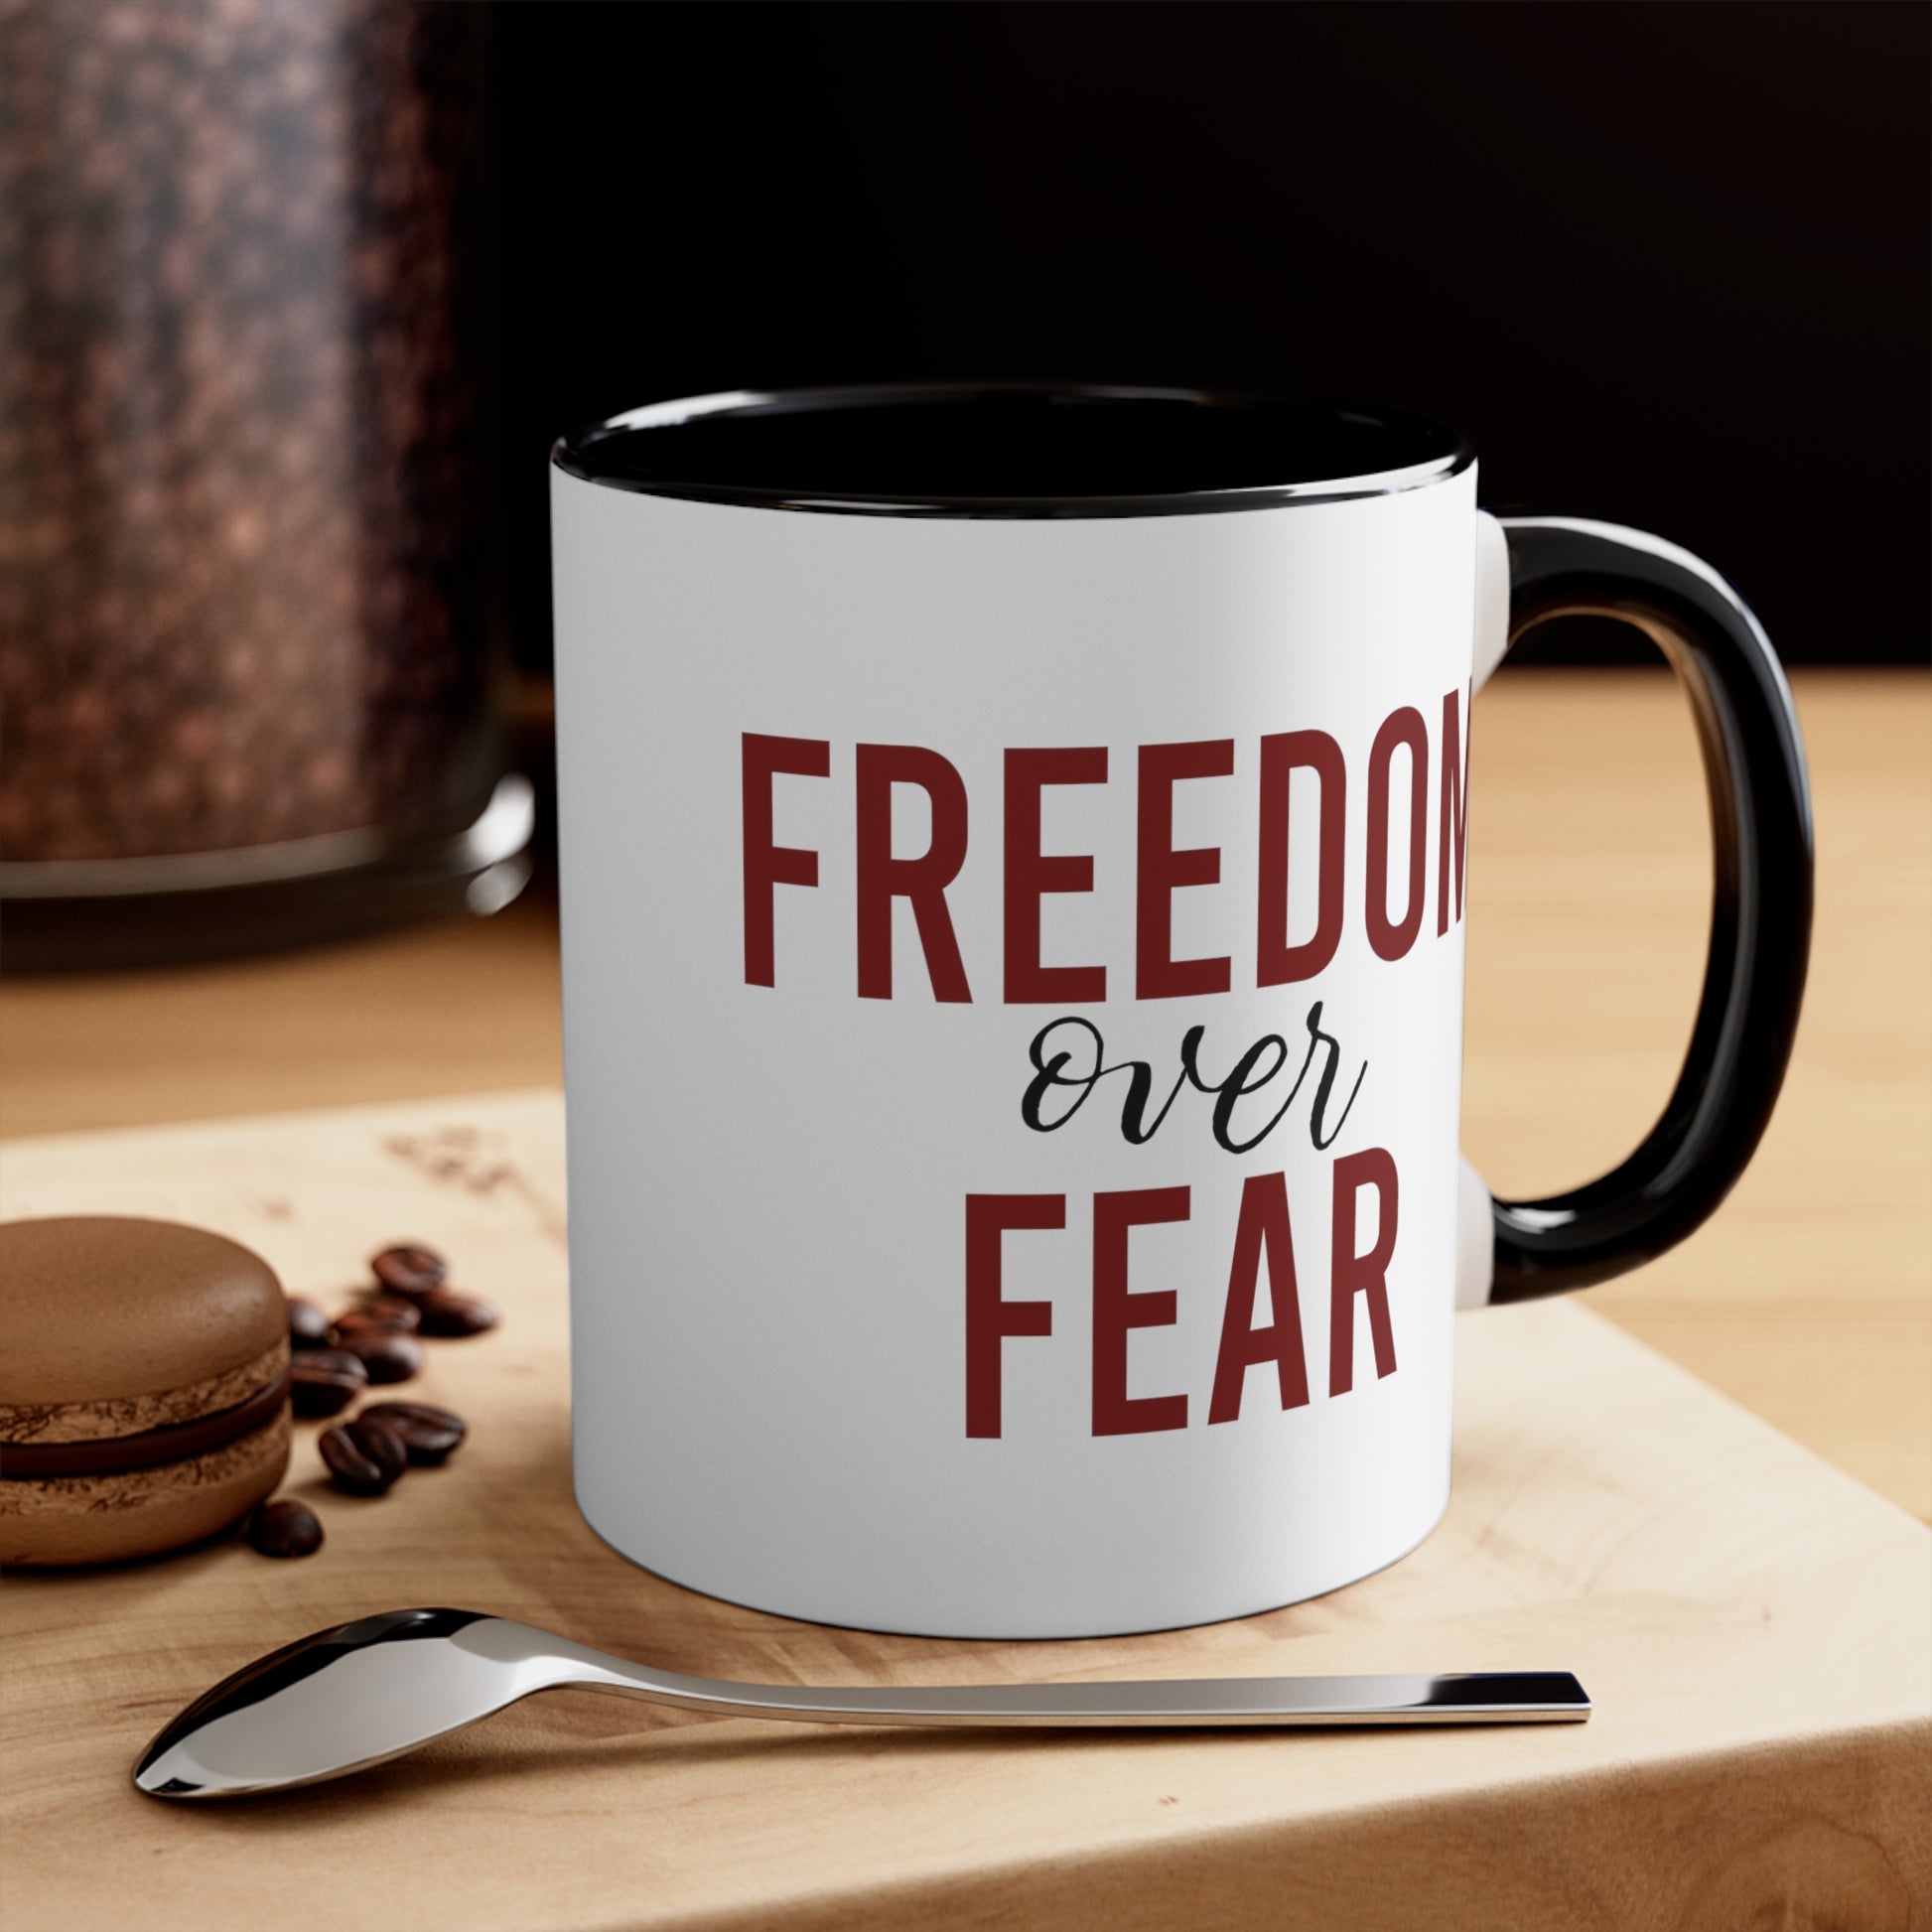 Freedom over Fear Ceramic Mug | Conservative Mug | Republican Mug | Conservative Gift | Conservative Apparel | Gift for Conservative Woman - News For Reasonable People